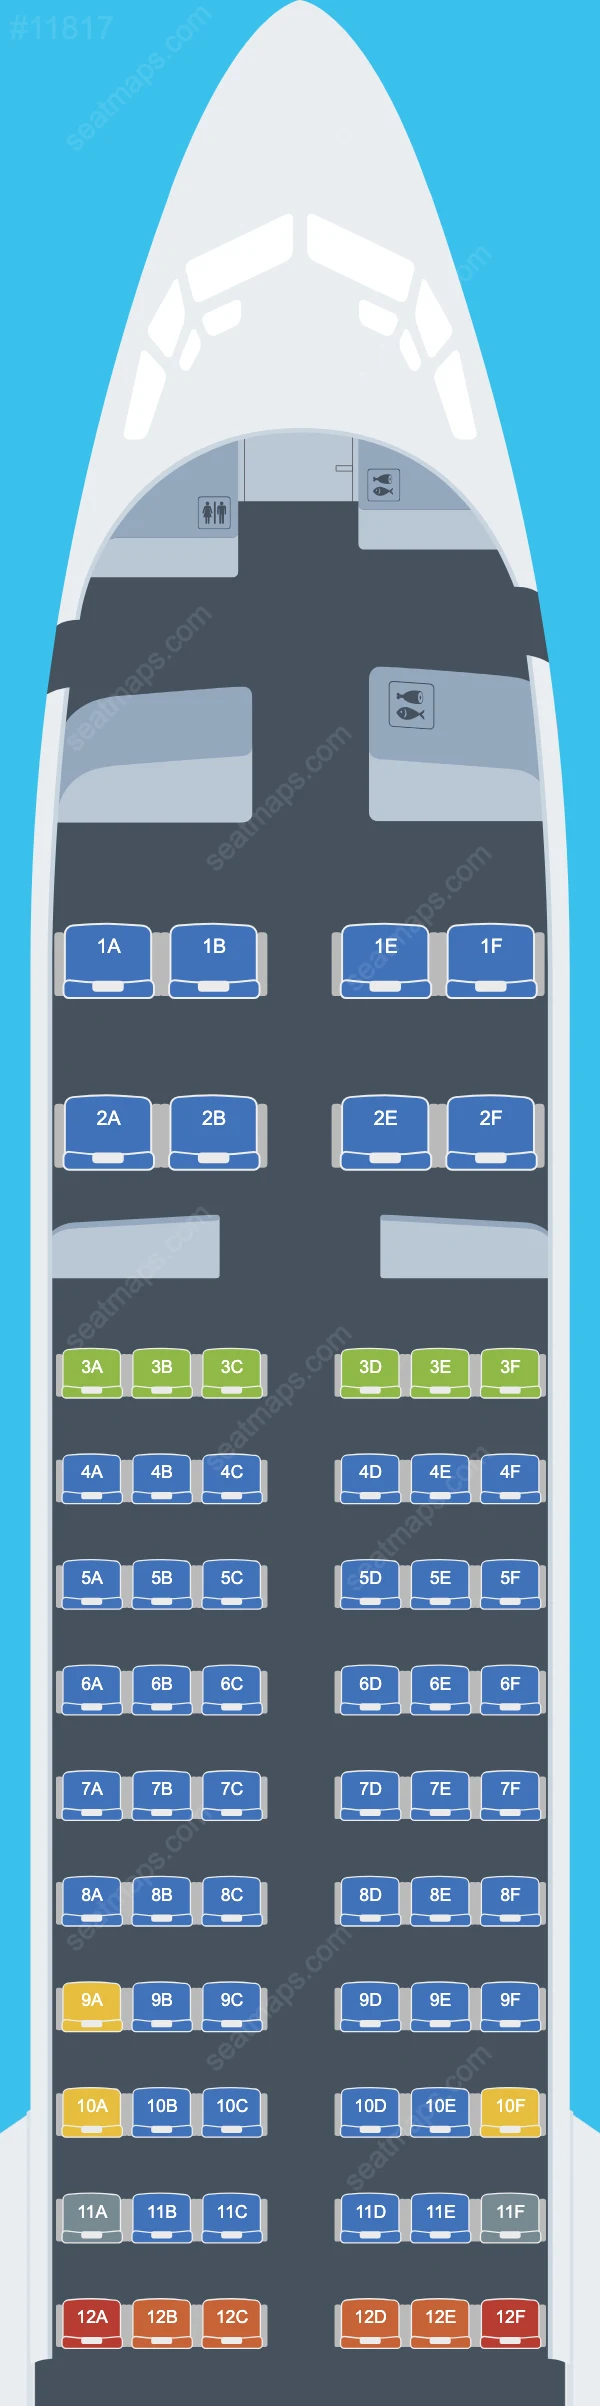 AJet Boeing 737 MAX 8 aircraft seat map  737 MAX 8 V.2